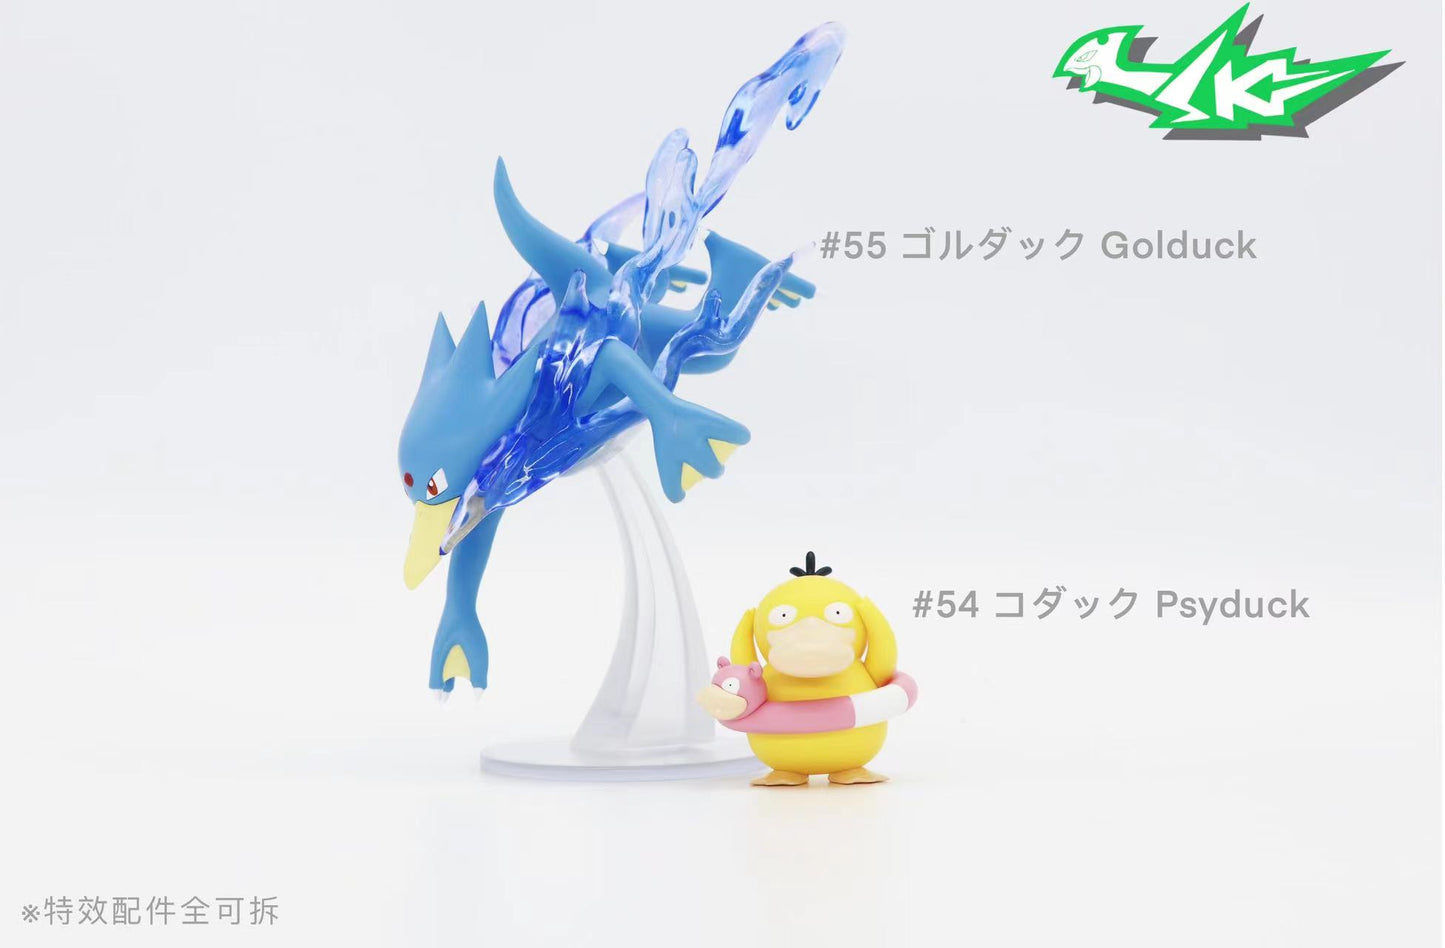 〖Sold Out〗Pokemon Scale World Psyduck Golduck #054 #055 1:20 - SK Studio